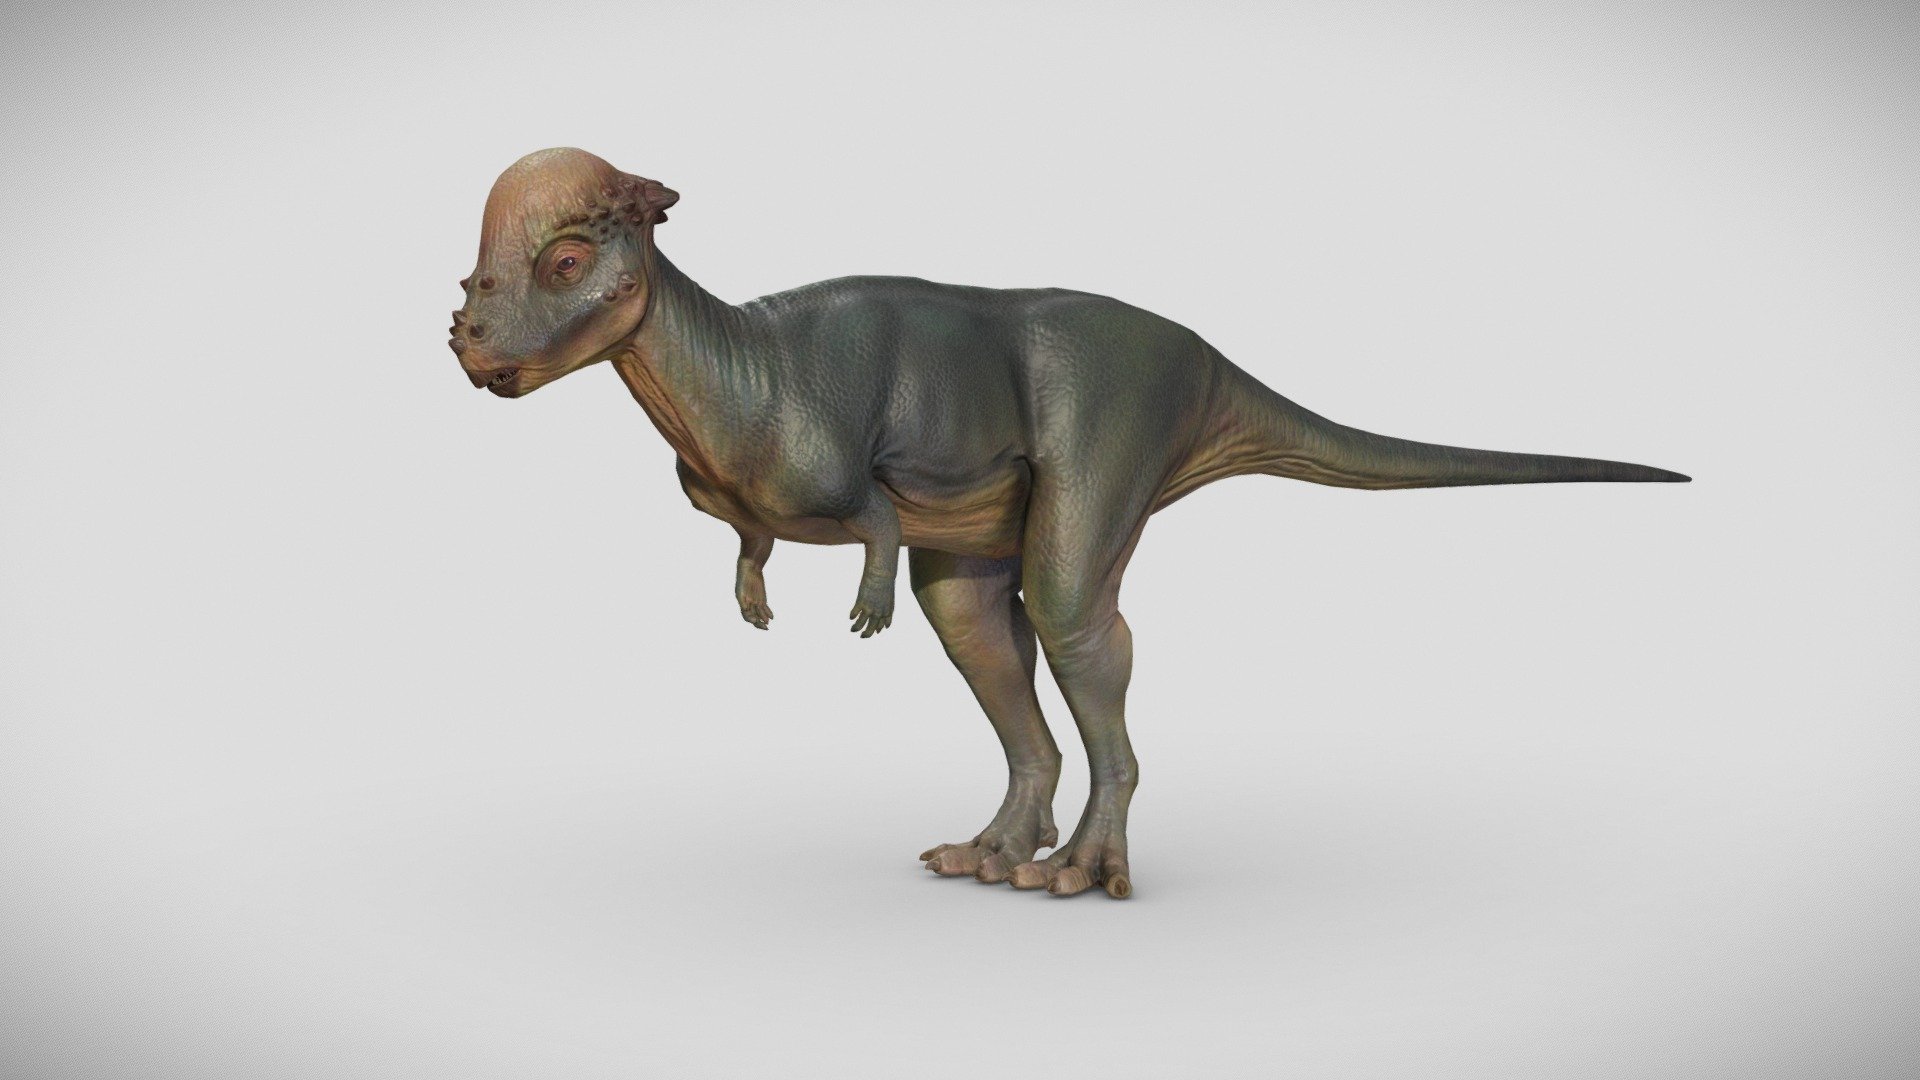 A Pachycephalosaurus model with textures. Model can be subdivided if high-poly is needed.

Color, Specular/Gloss, Occlusion, Cavity, and Displacement maps are 4096.

Normal Map is 8192.

Collada, FBX, and OBJ formats included 3d model